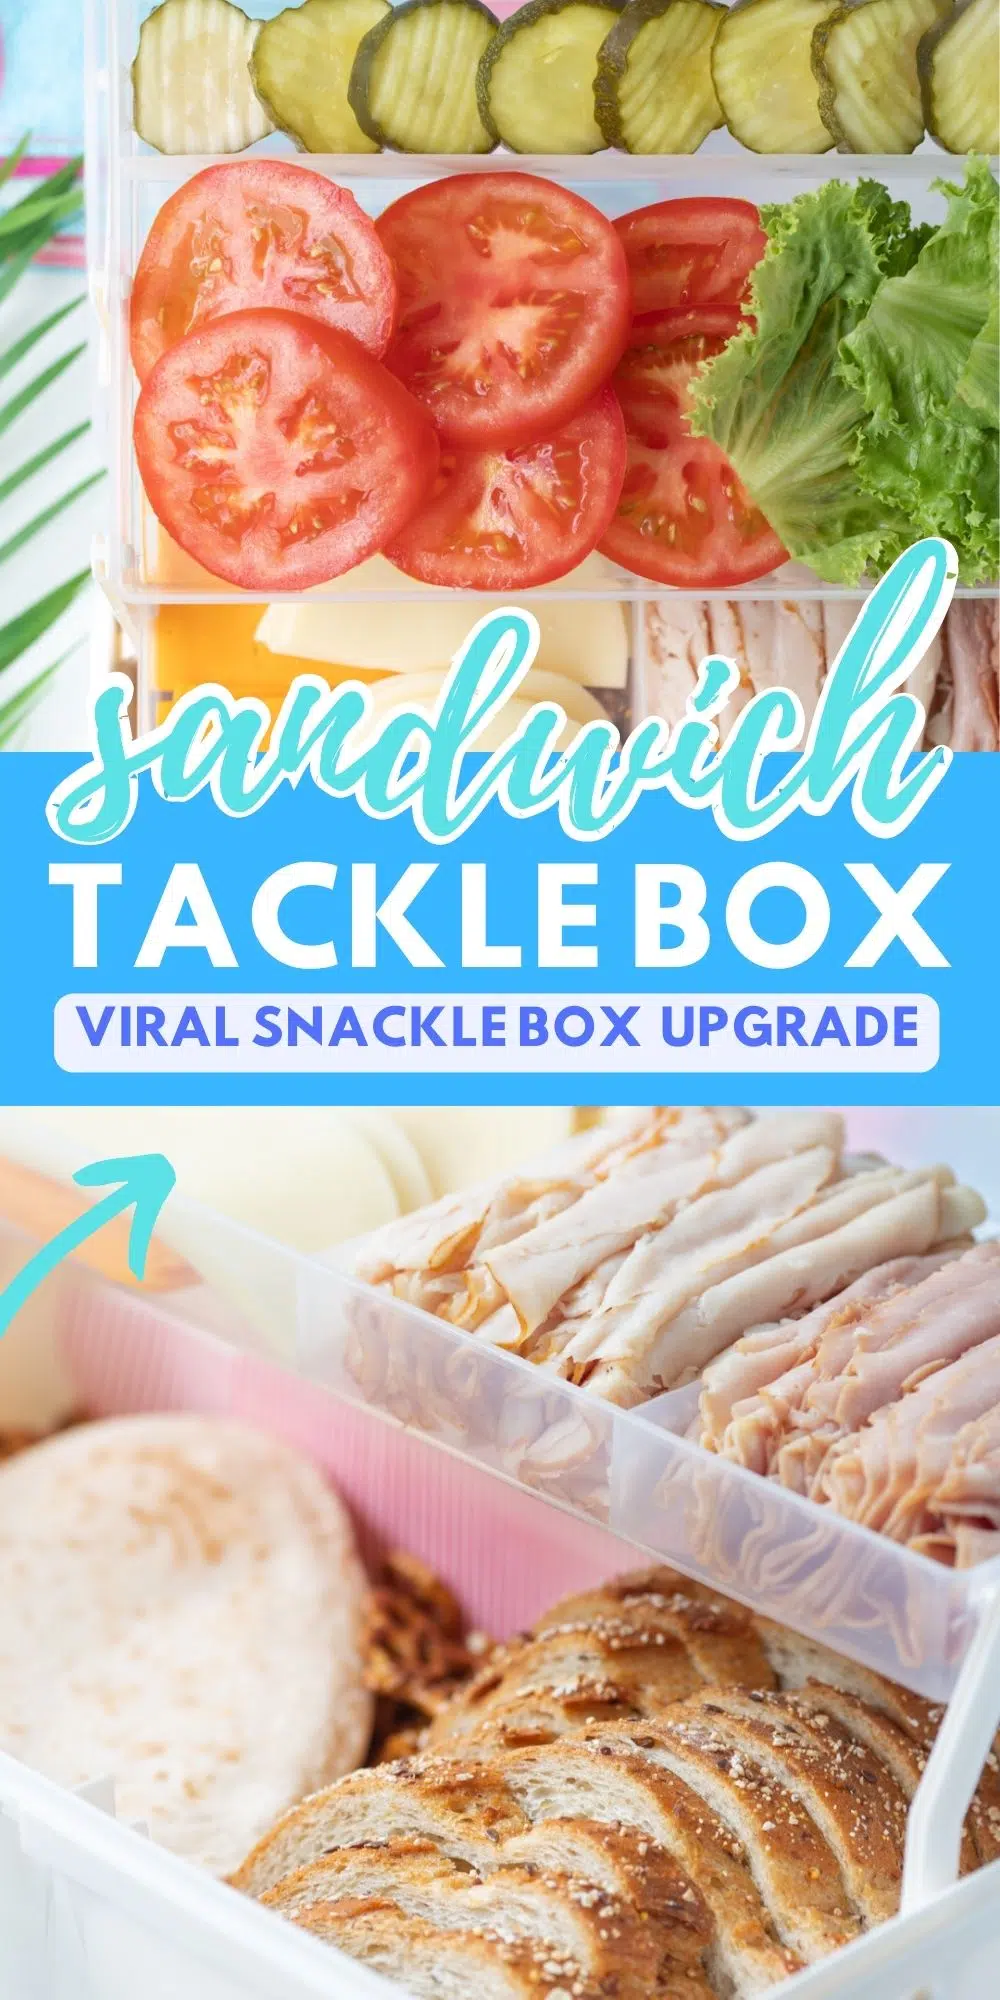 Snackle Boxes Will Level Up Your Charcuterie Game